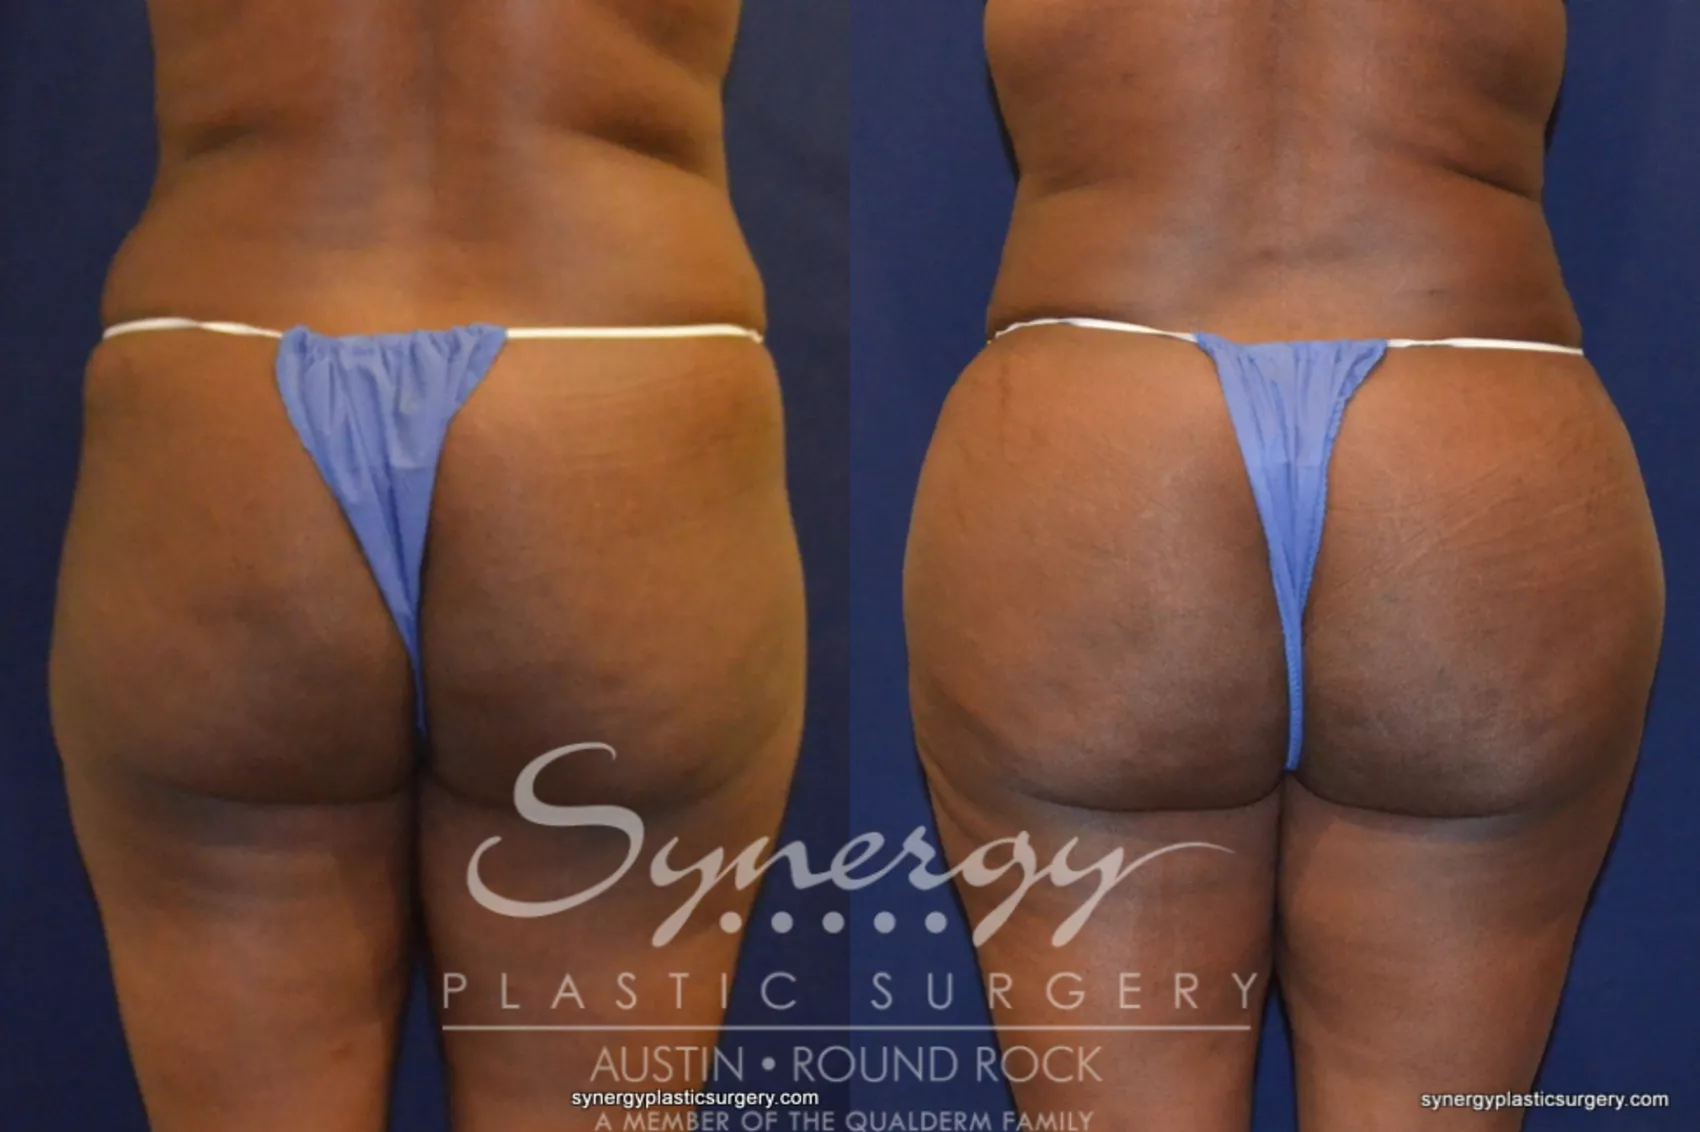 Brazilian Buttock Lift Before and After Pictures Case 68, Gilbert, AZ